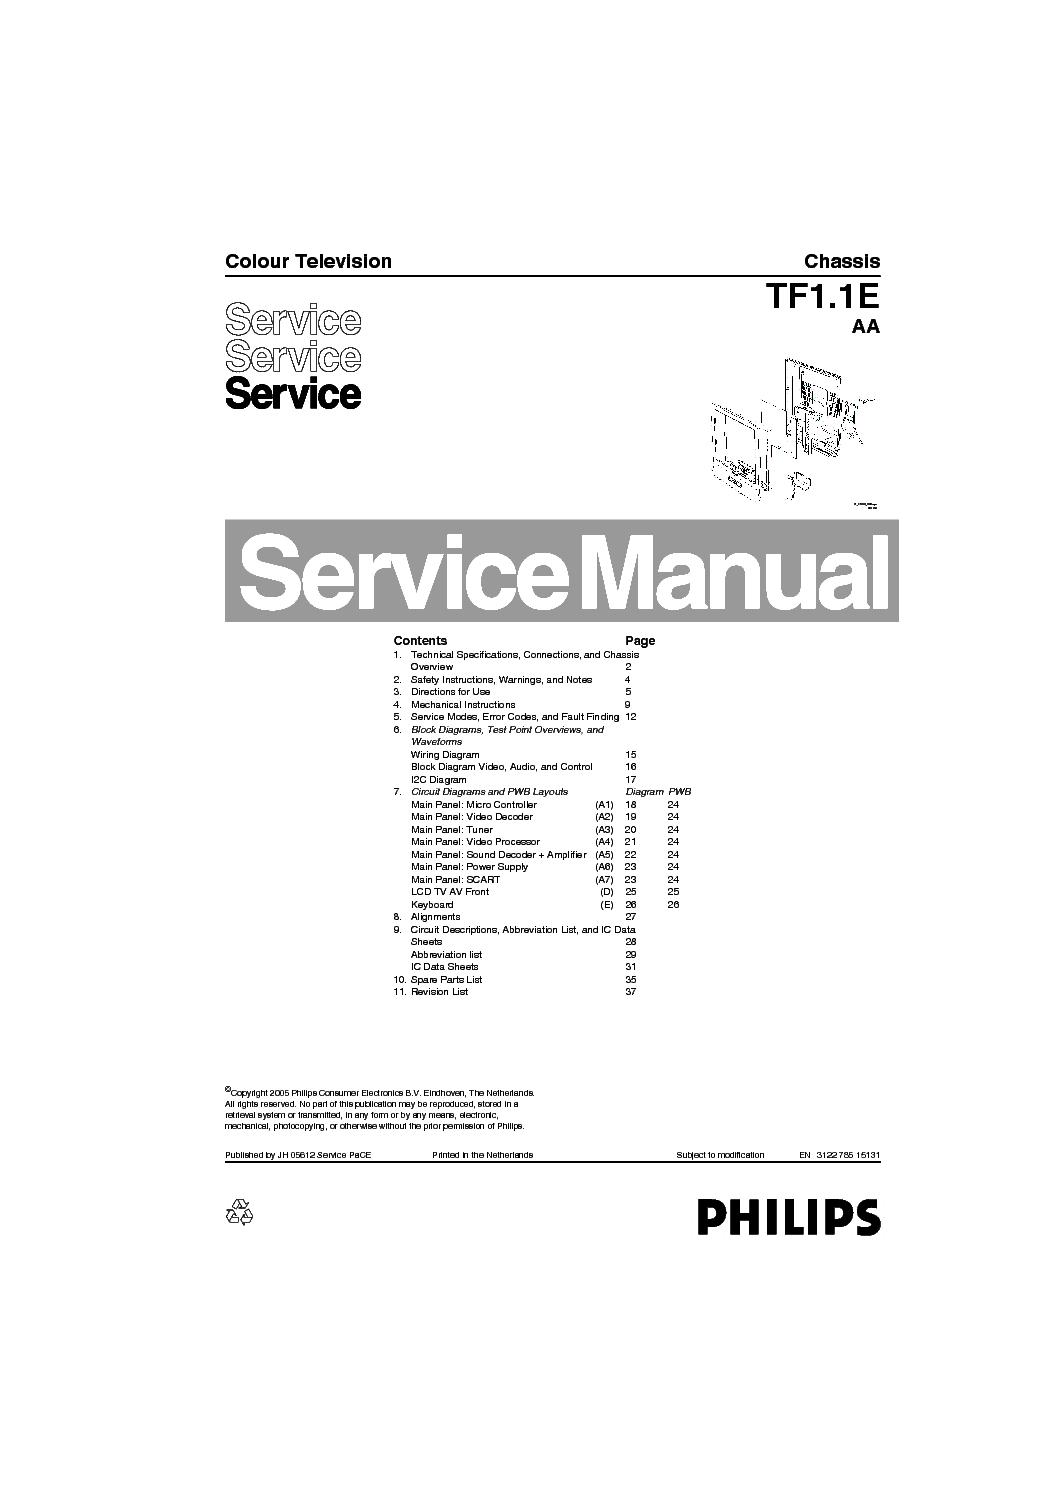 PHILIPS CHASSIS TF1.1E-AA SM service manual (1st page)